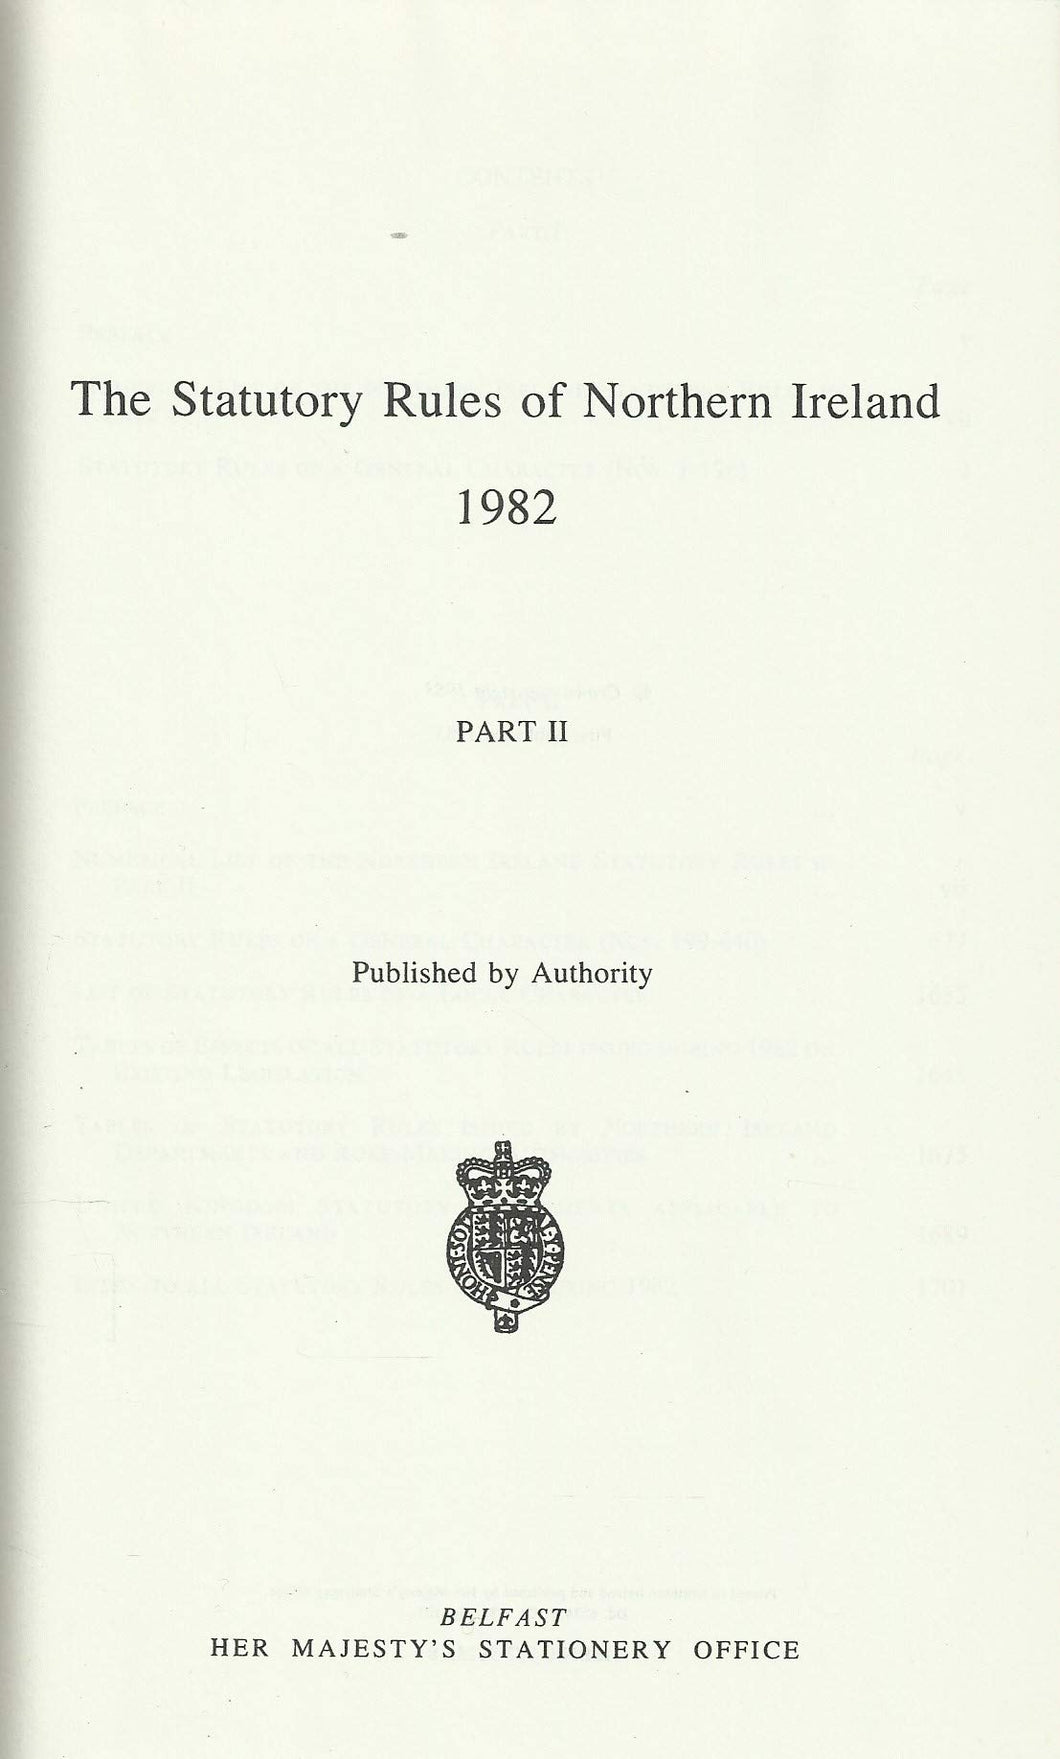 The Statutory Rules of Northern Ireland: 1982 Part 2 nos